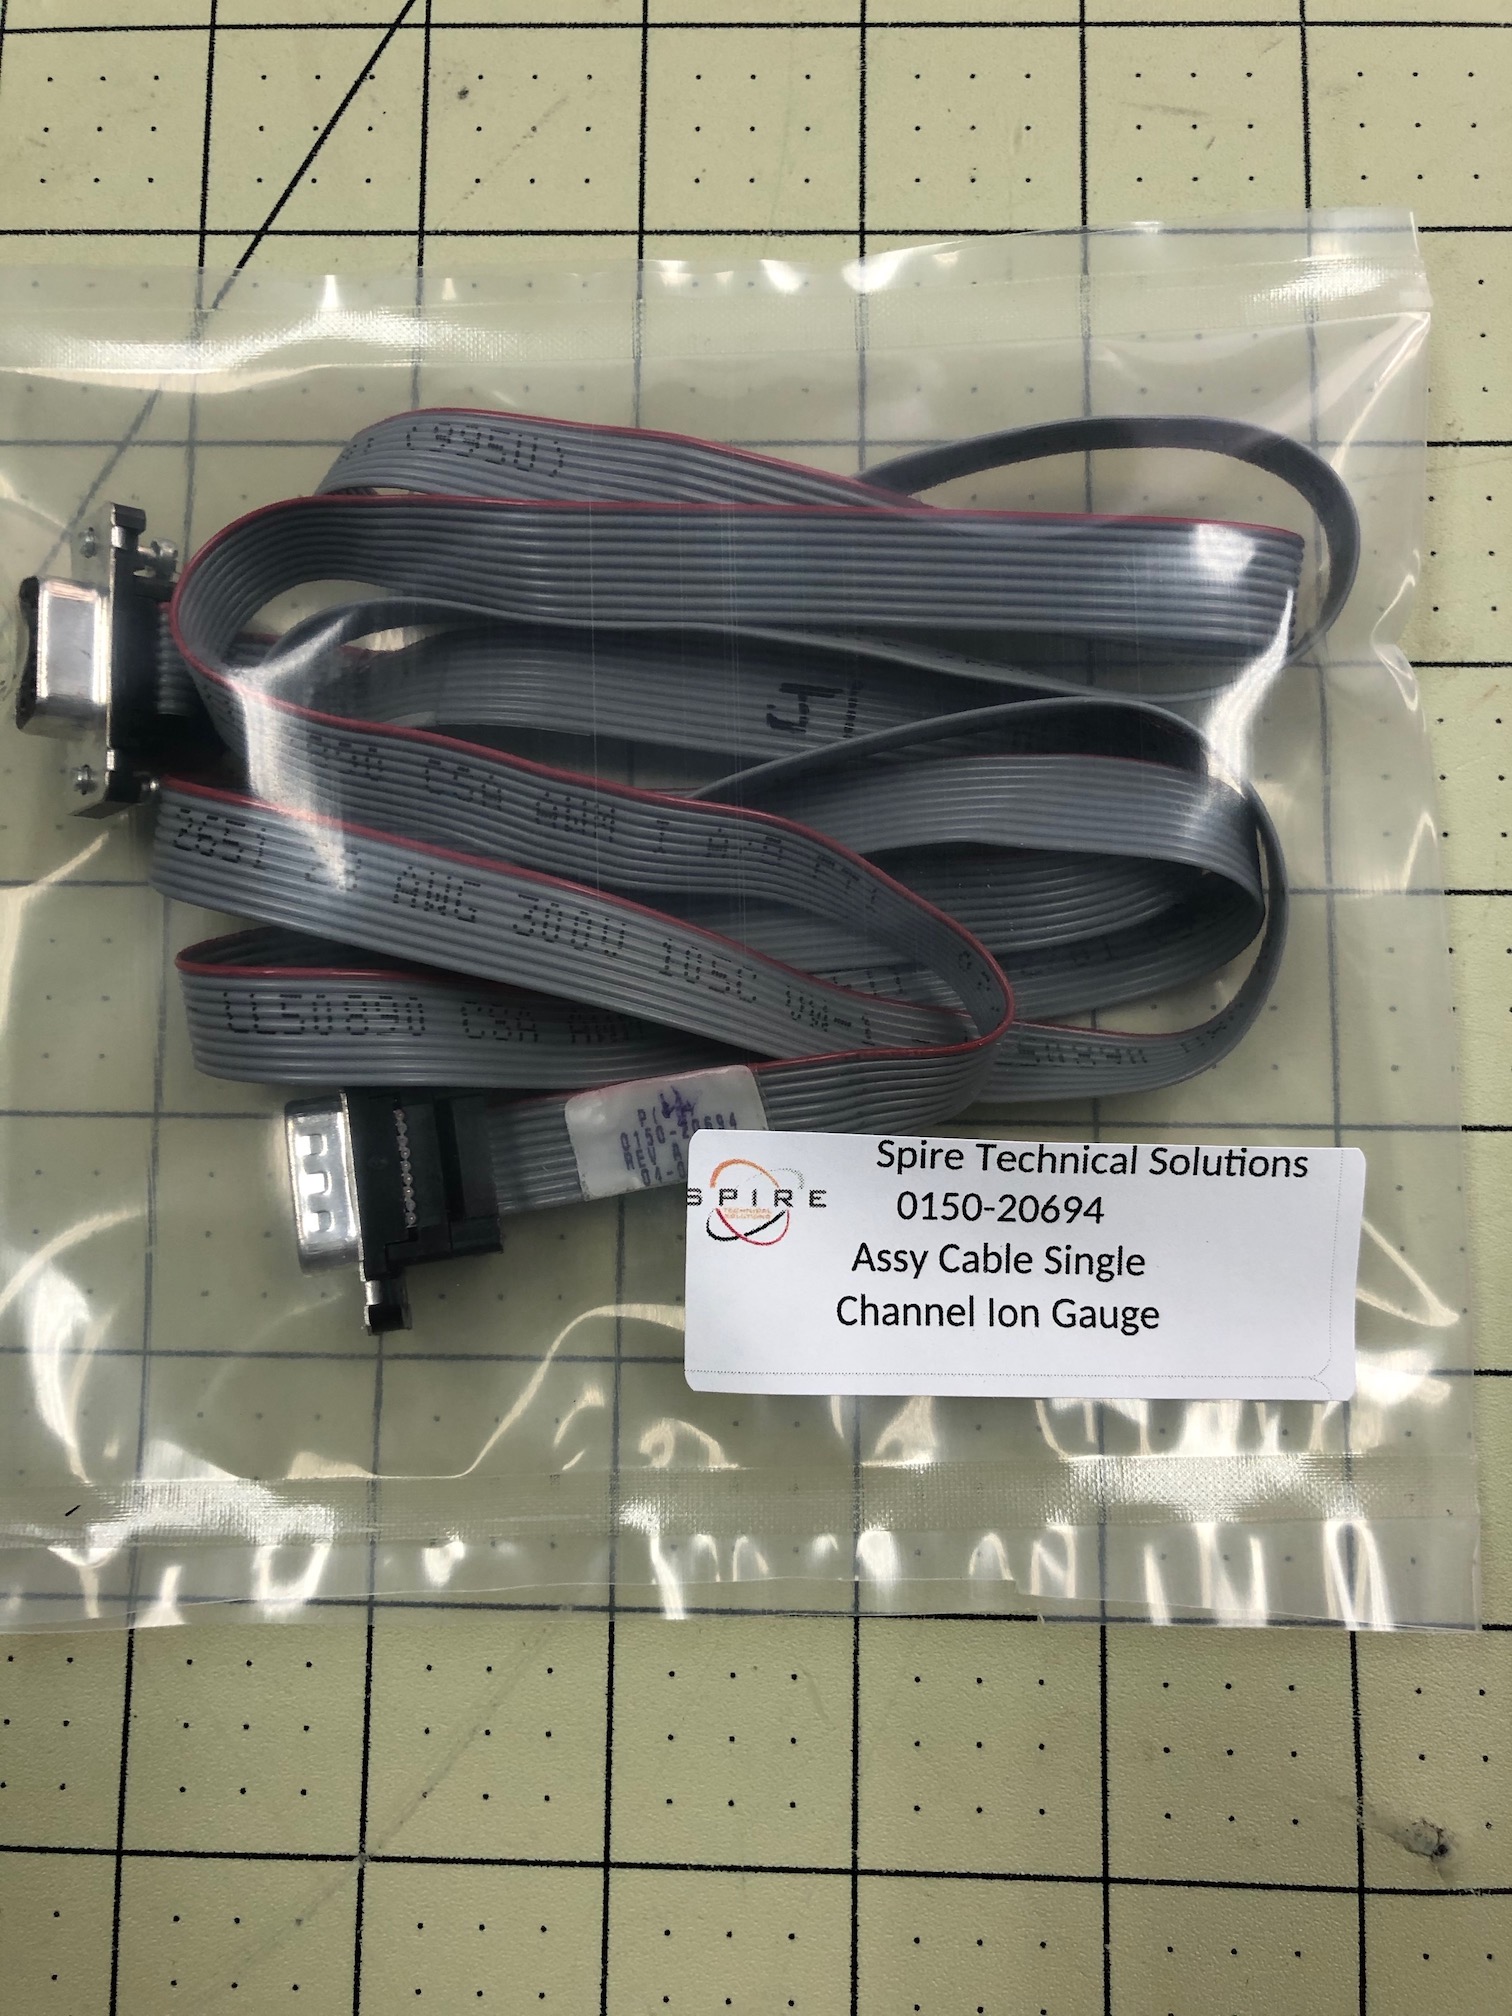 Assy Cable Single Channel Ion Gauge